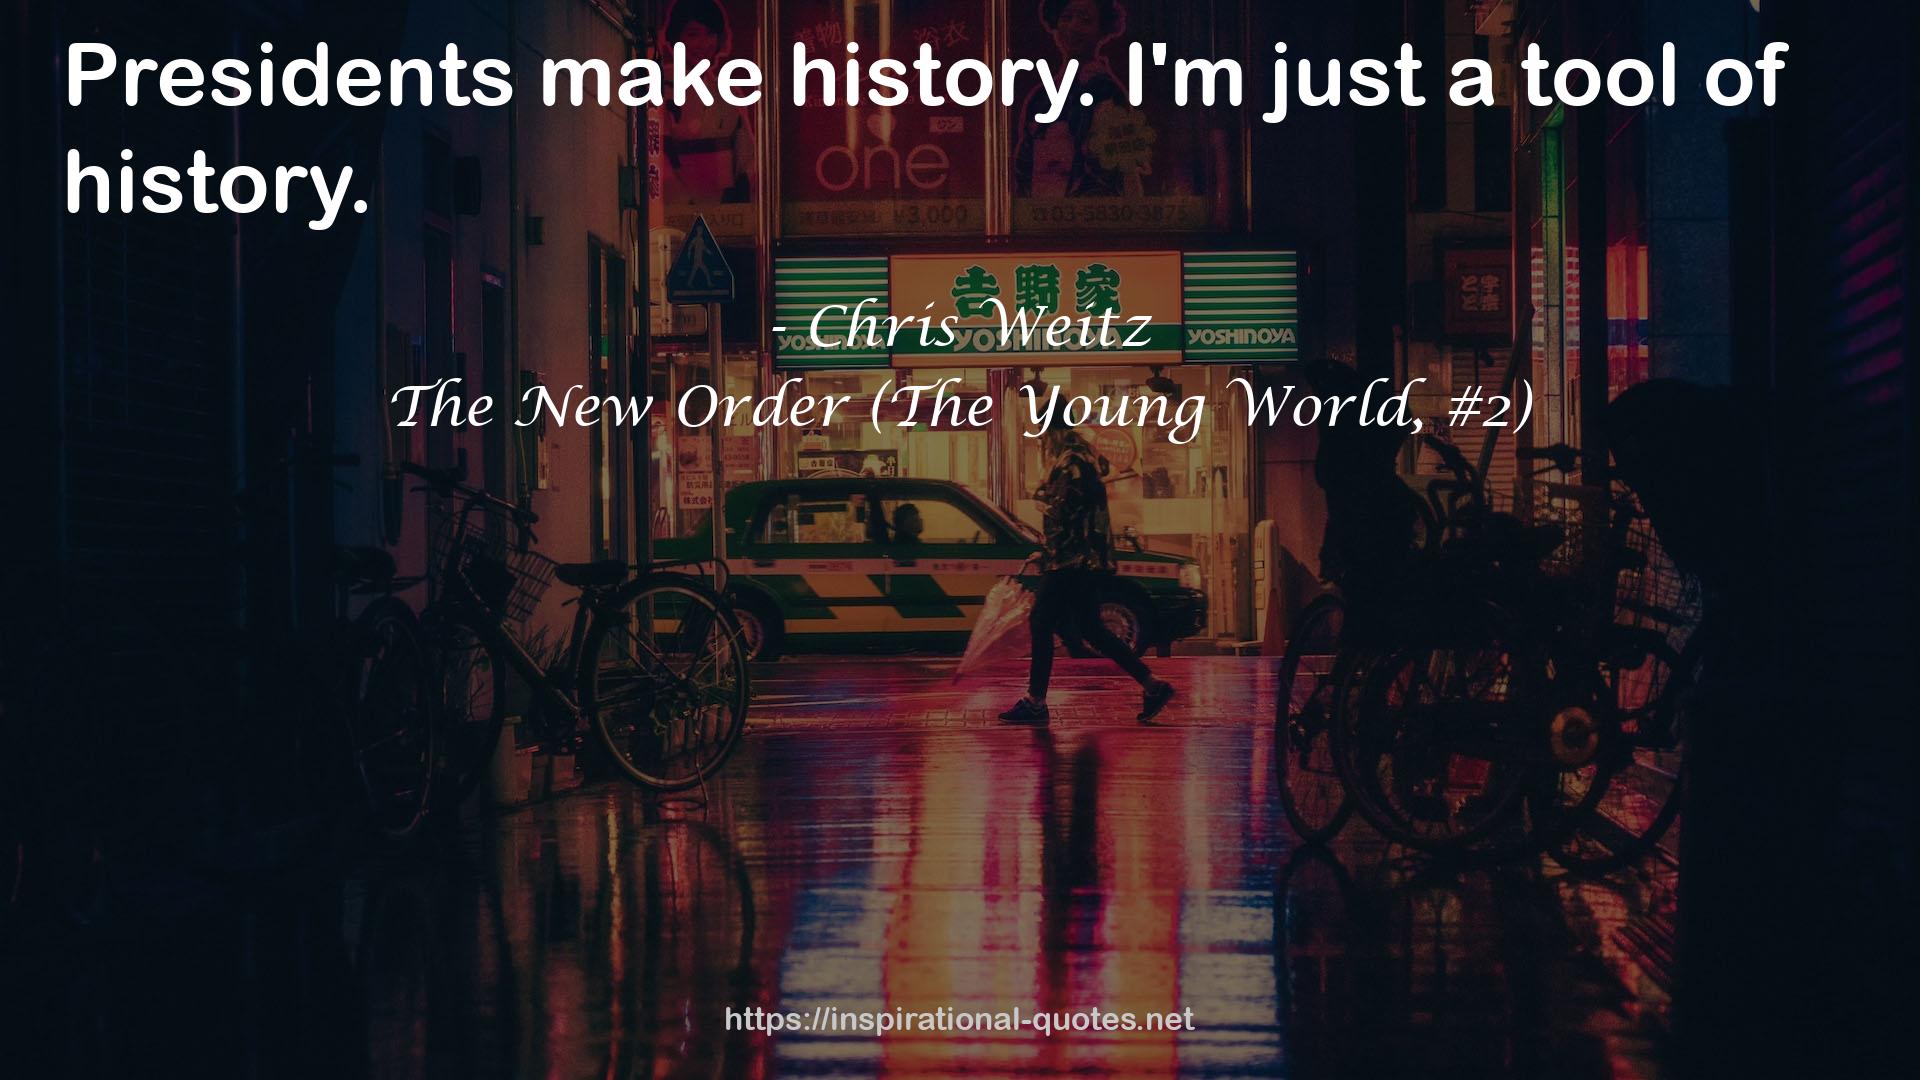 The New Order (The Young World, #2) QUOTES